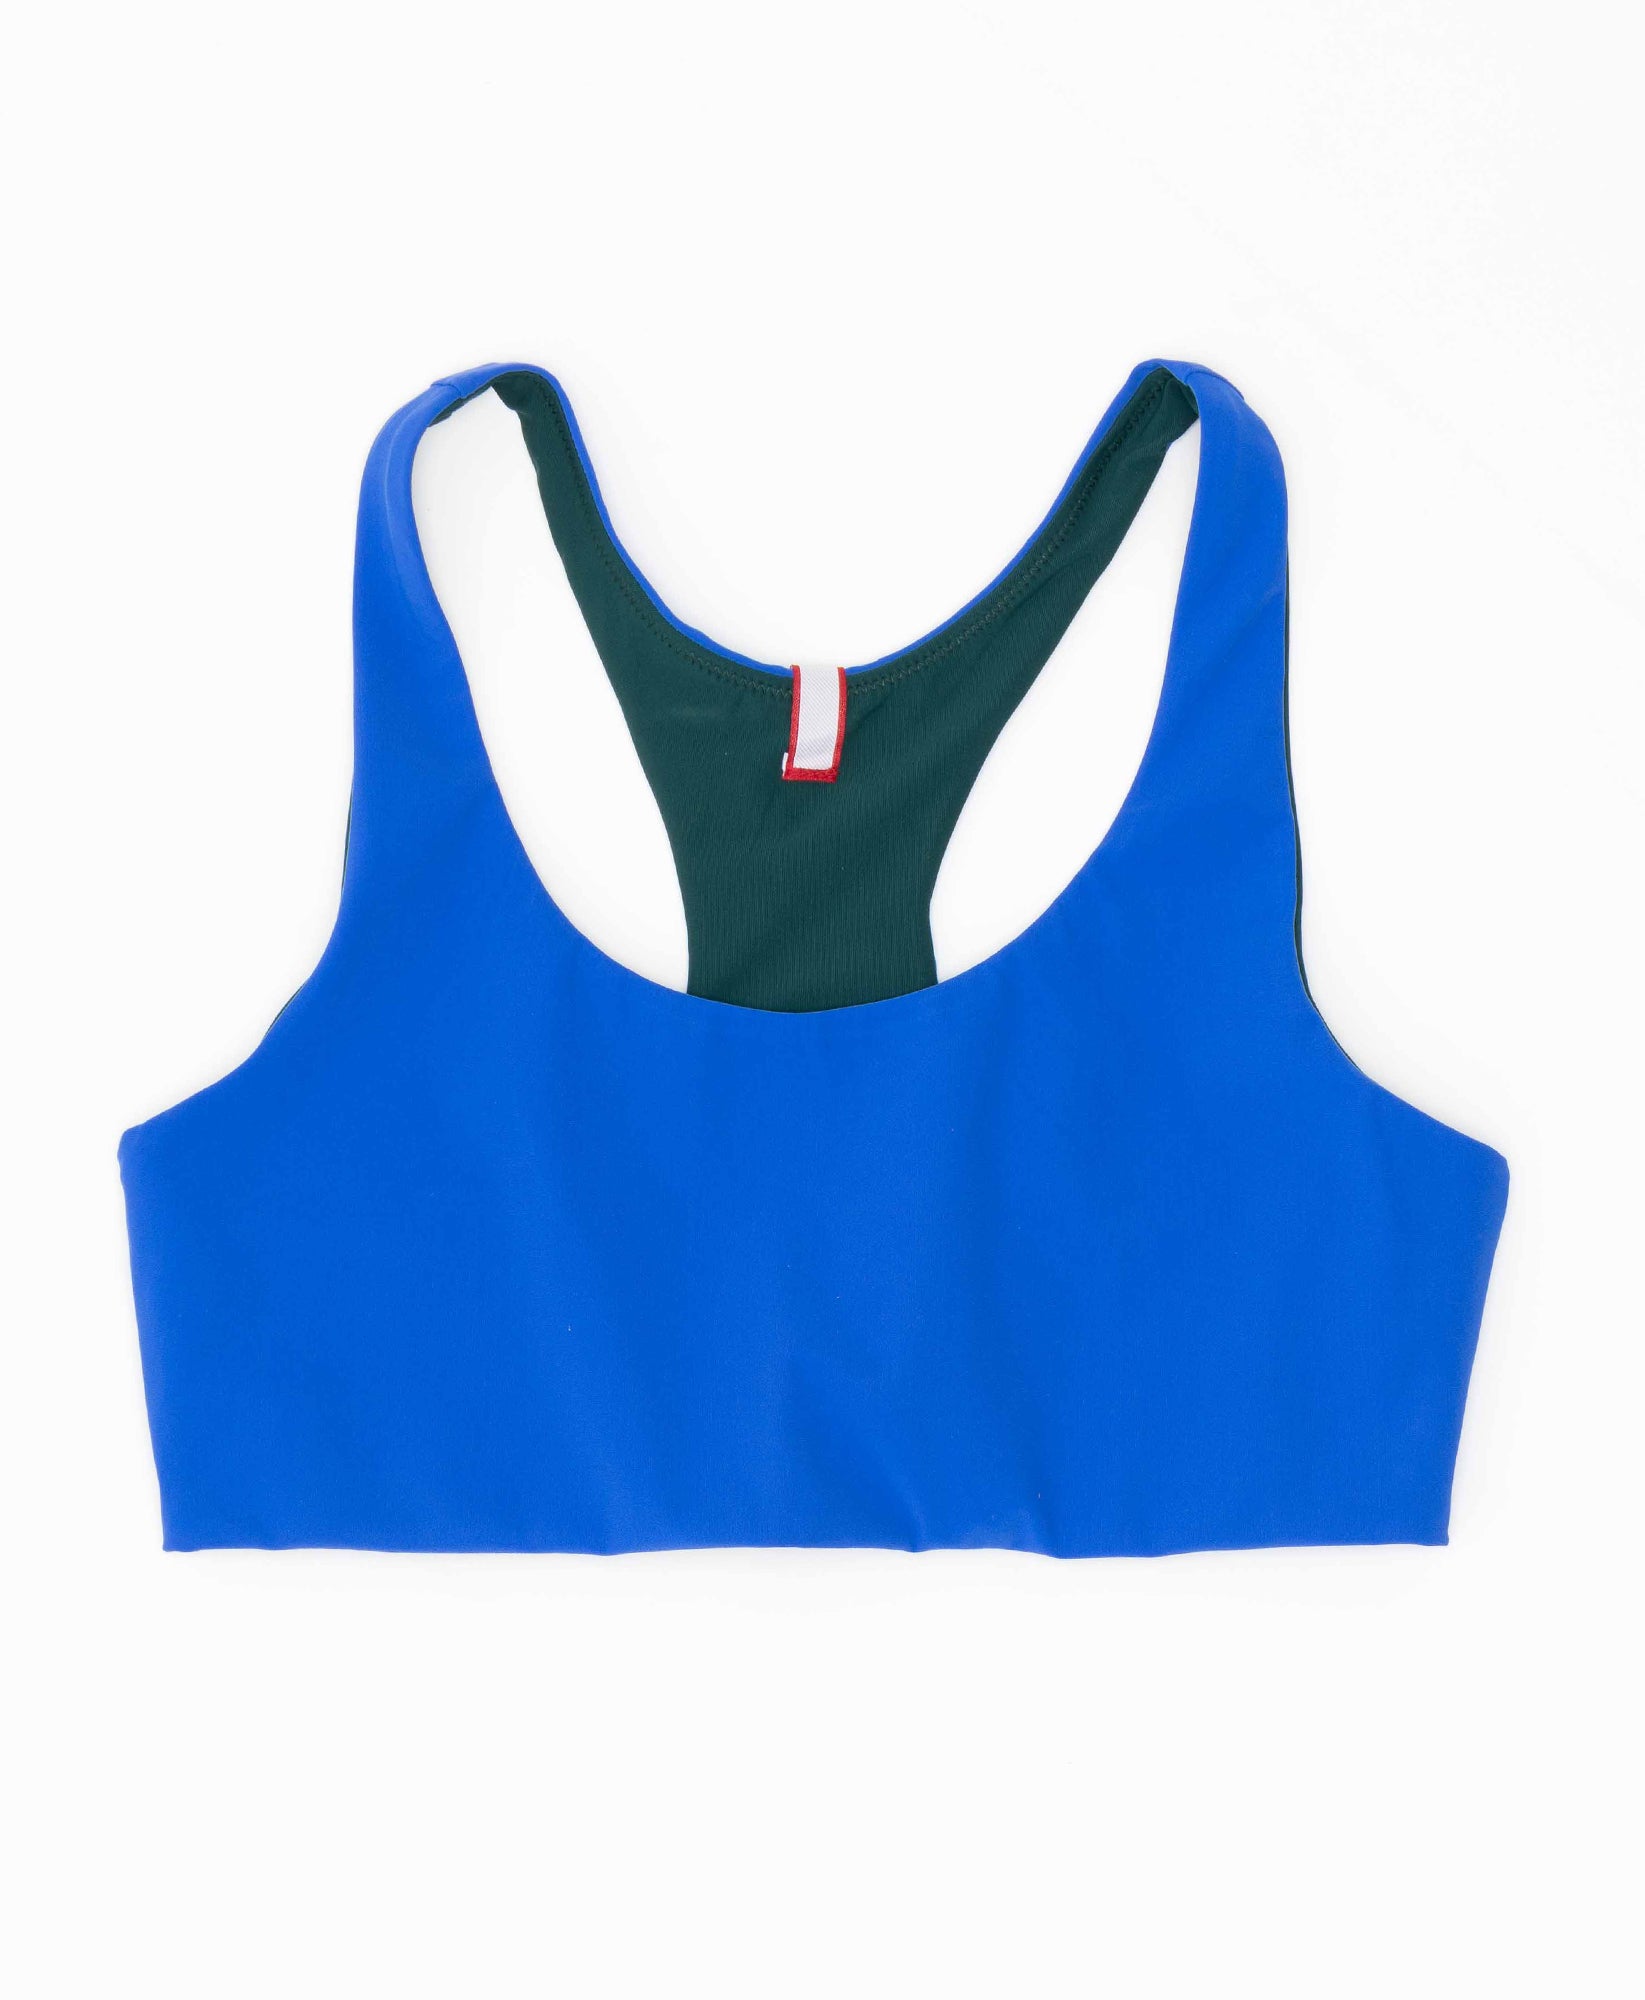 Wear One's At Race You Back Bra in Revive Blue Flat Front